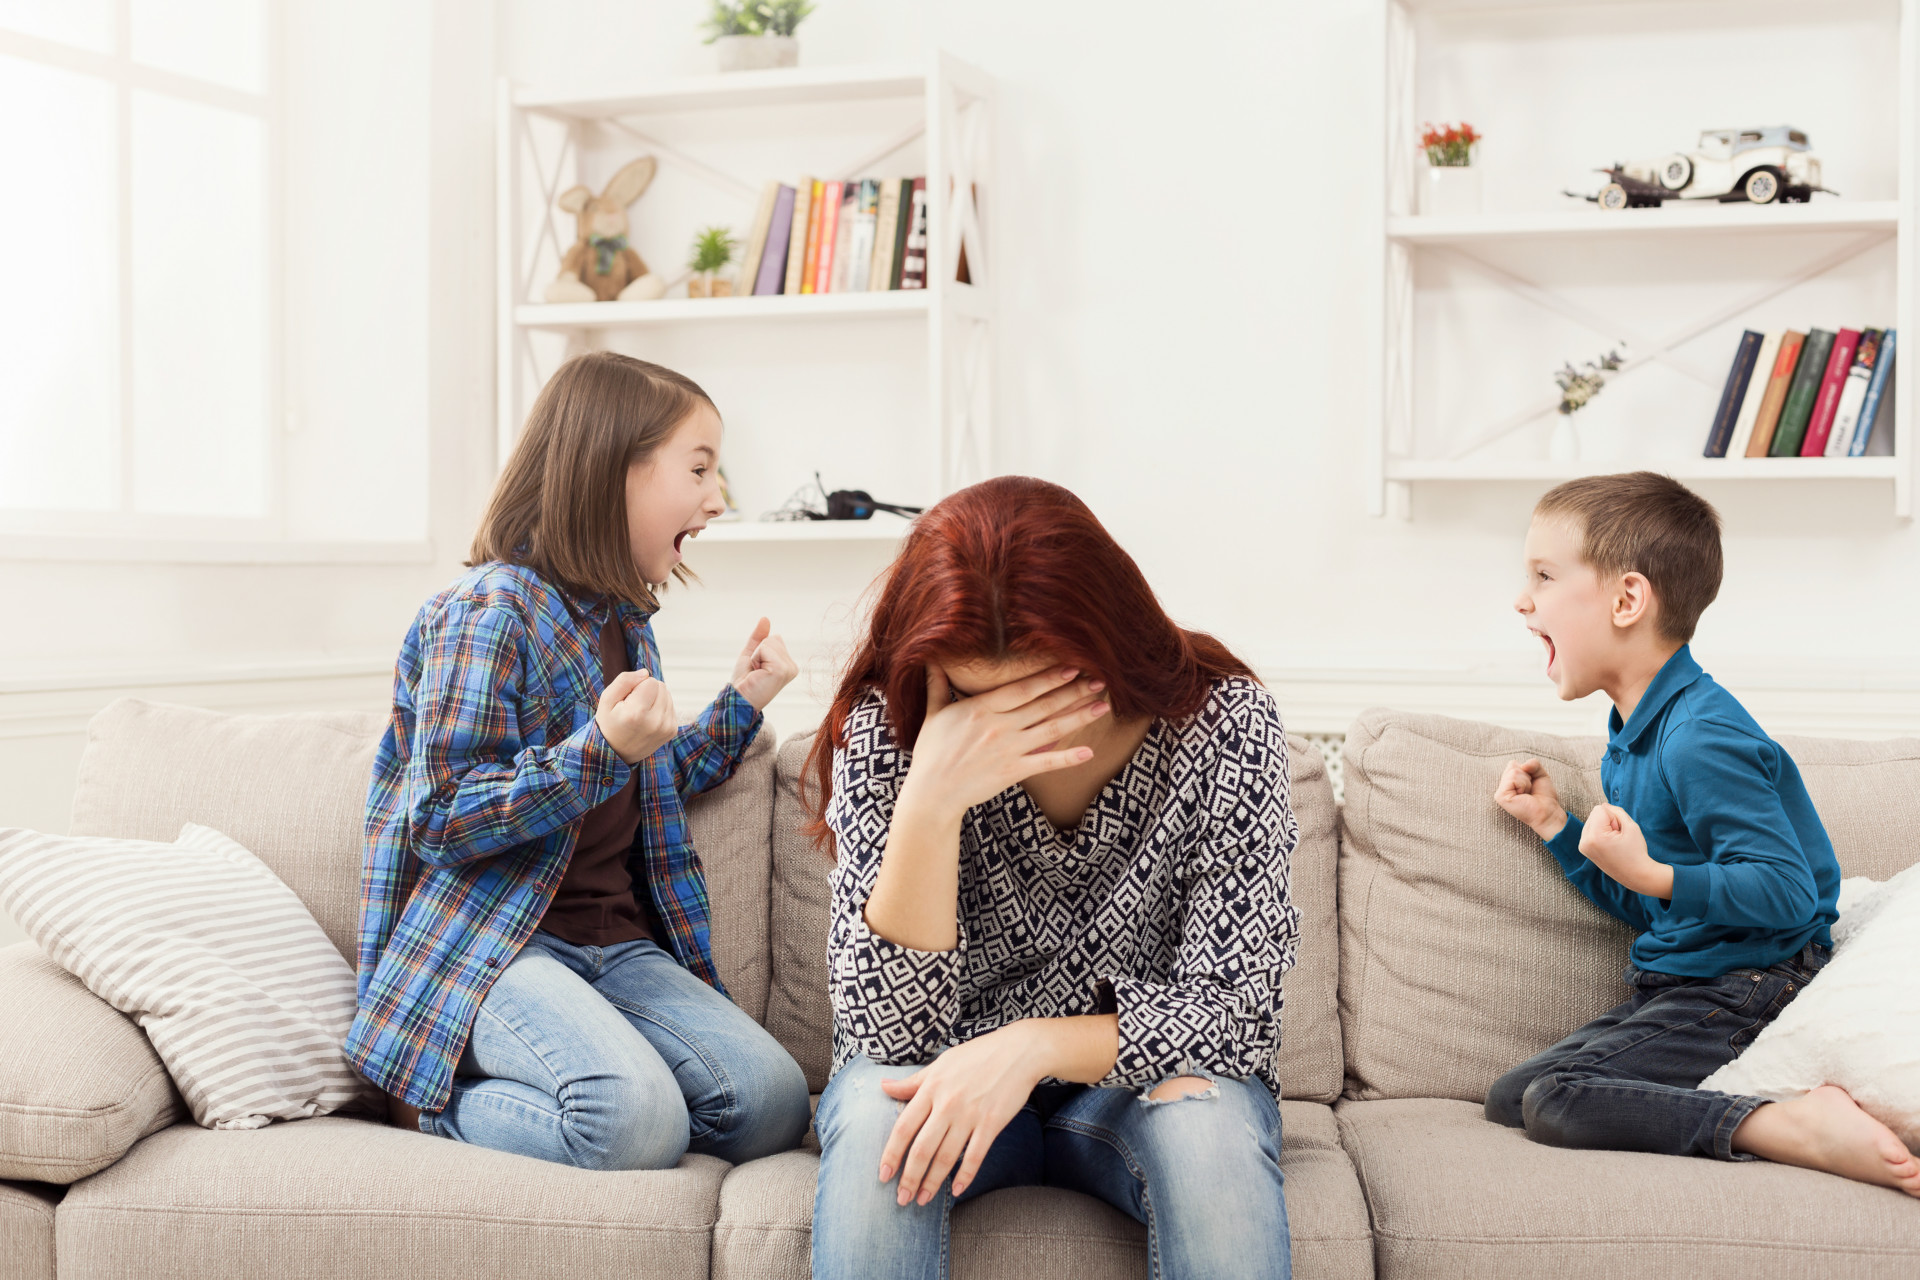 How do I stop my children from fighting?